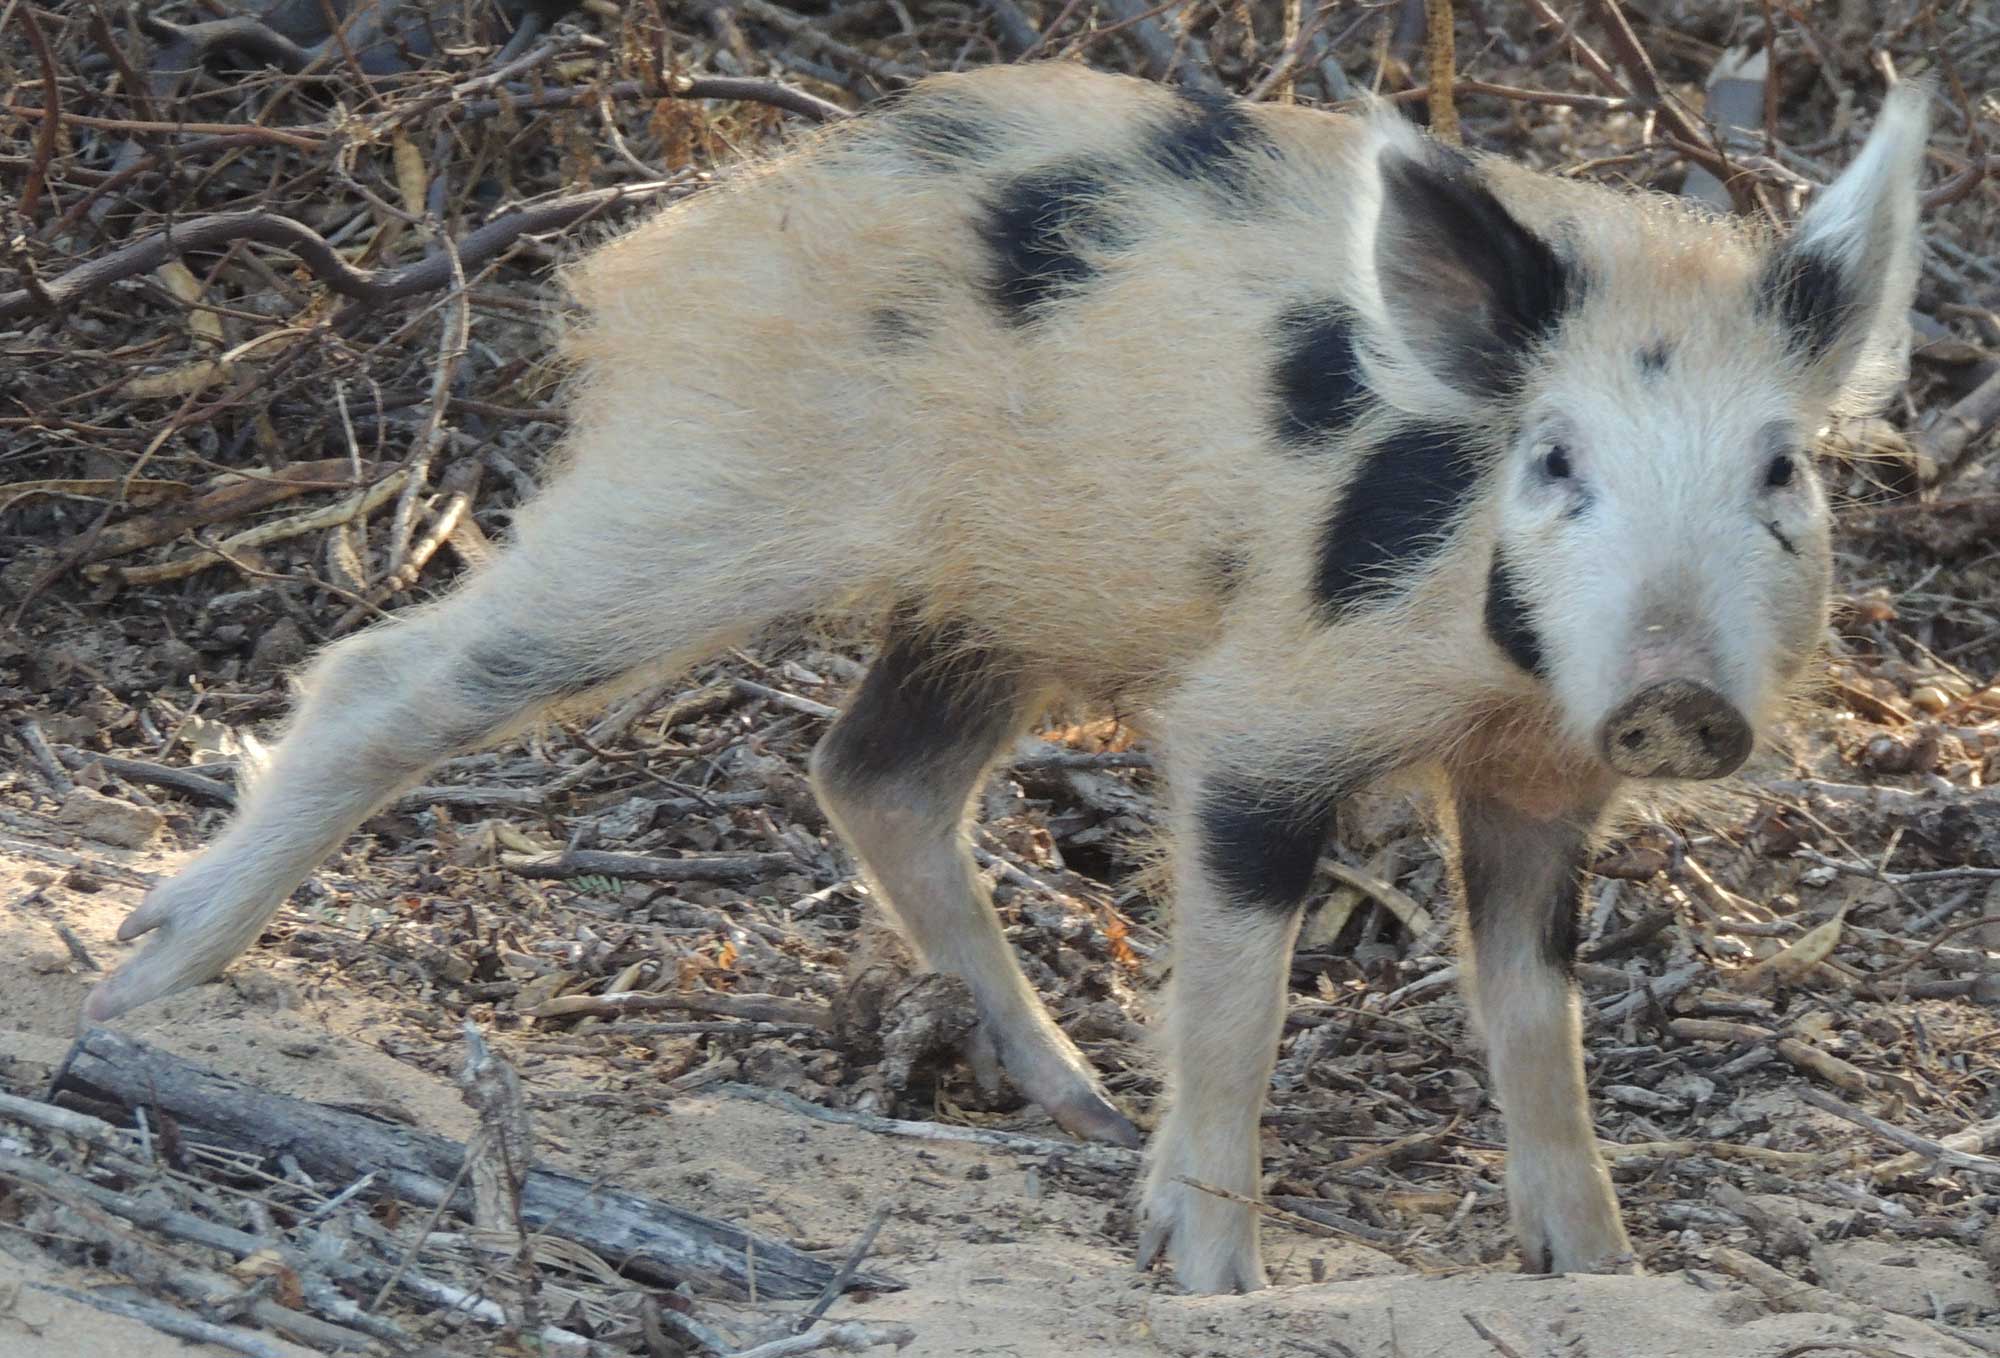 Photograph of a feral pig on Maui. The pig is covered in off-white hair with black spots.